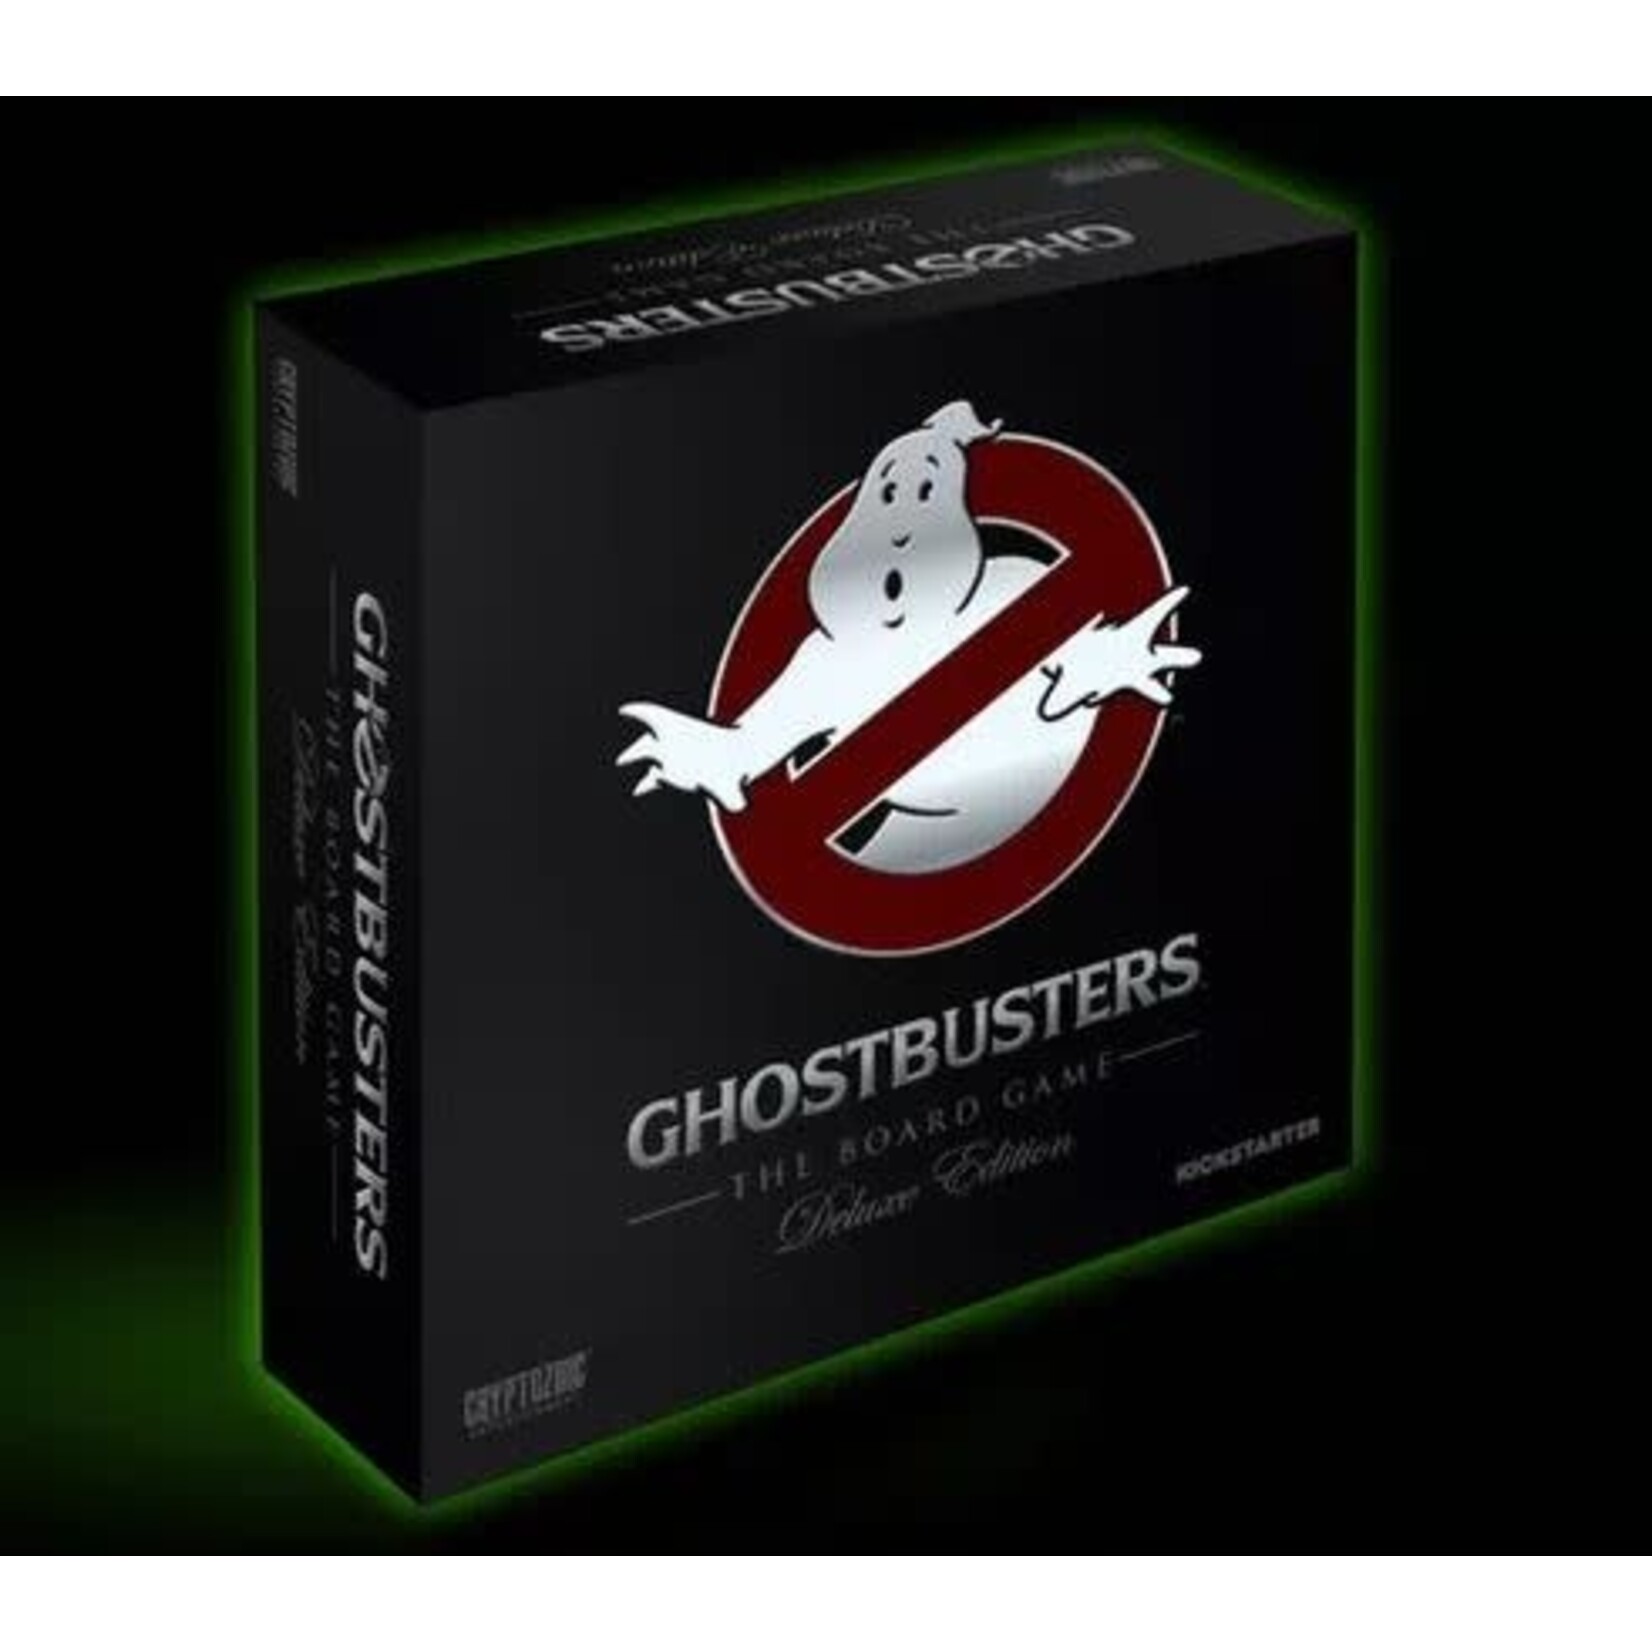 #18383 Ghostbusters Deluxe Edition Kickstarter - All Add-Ons Dragon Cache Used Game